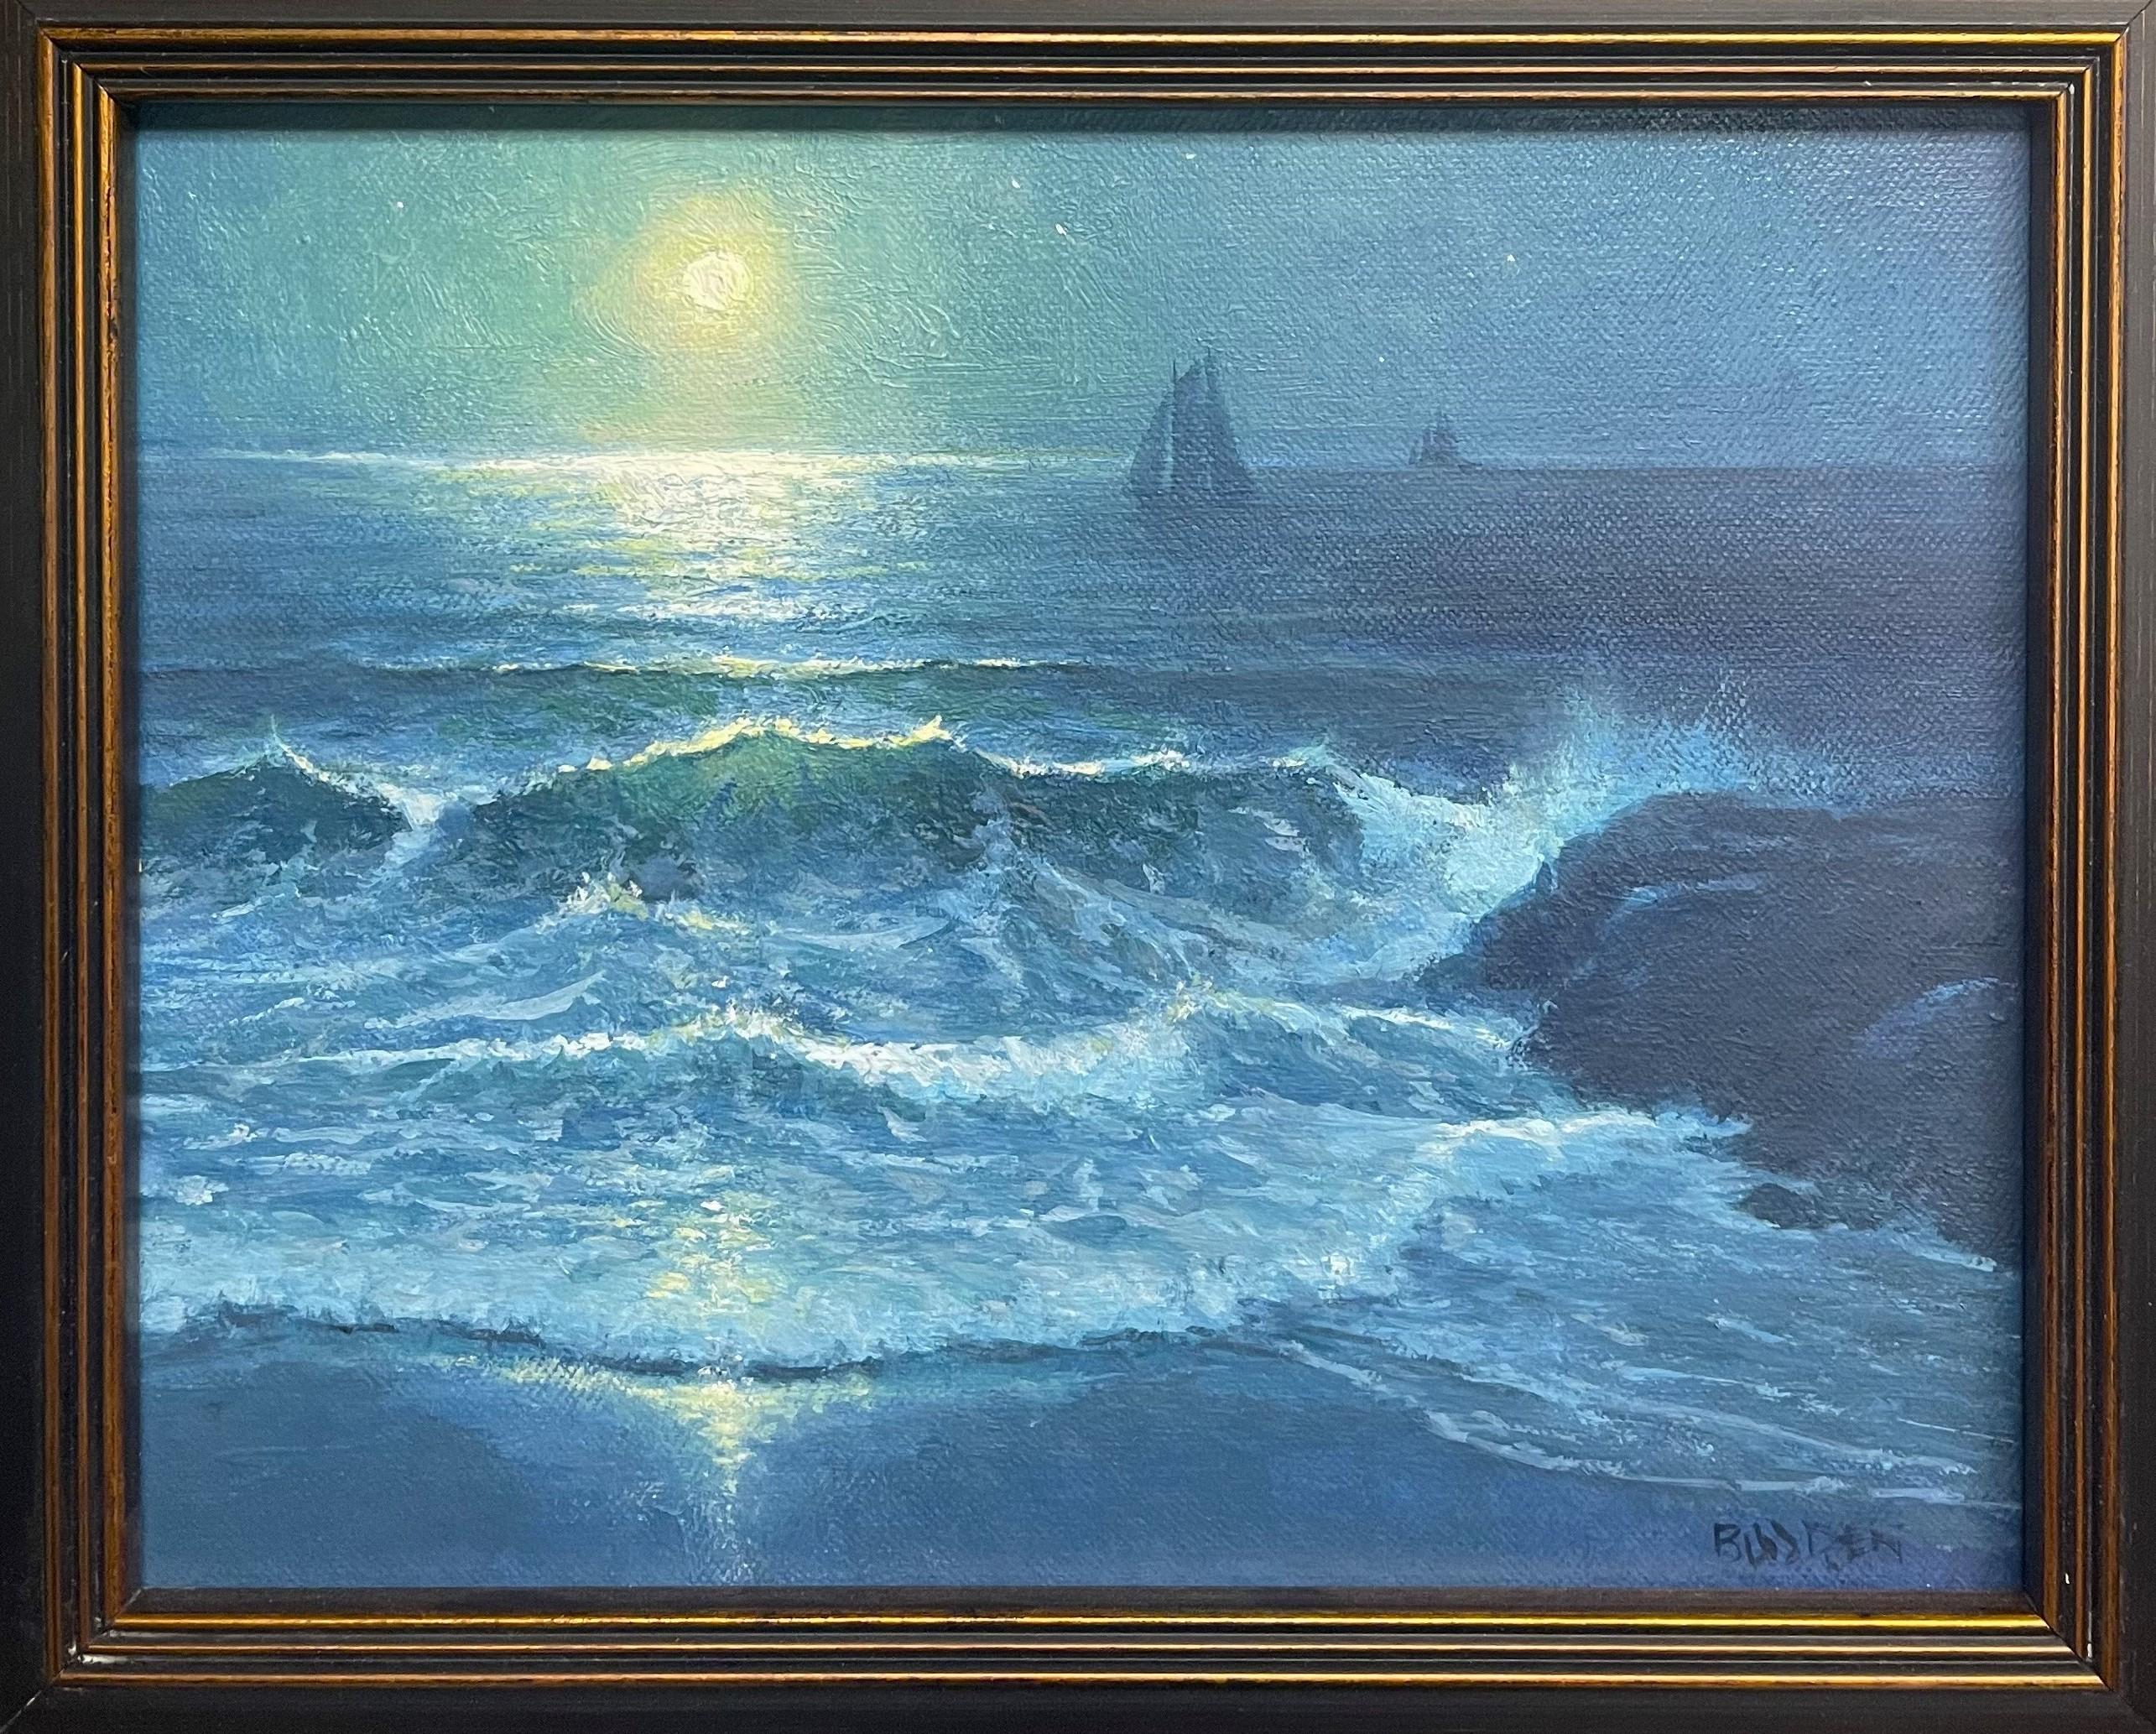  Impressionistic Moonlight Seascape OilPainting Michael Budden MysticalMonlight For Sale 1